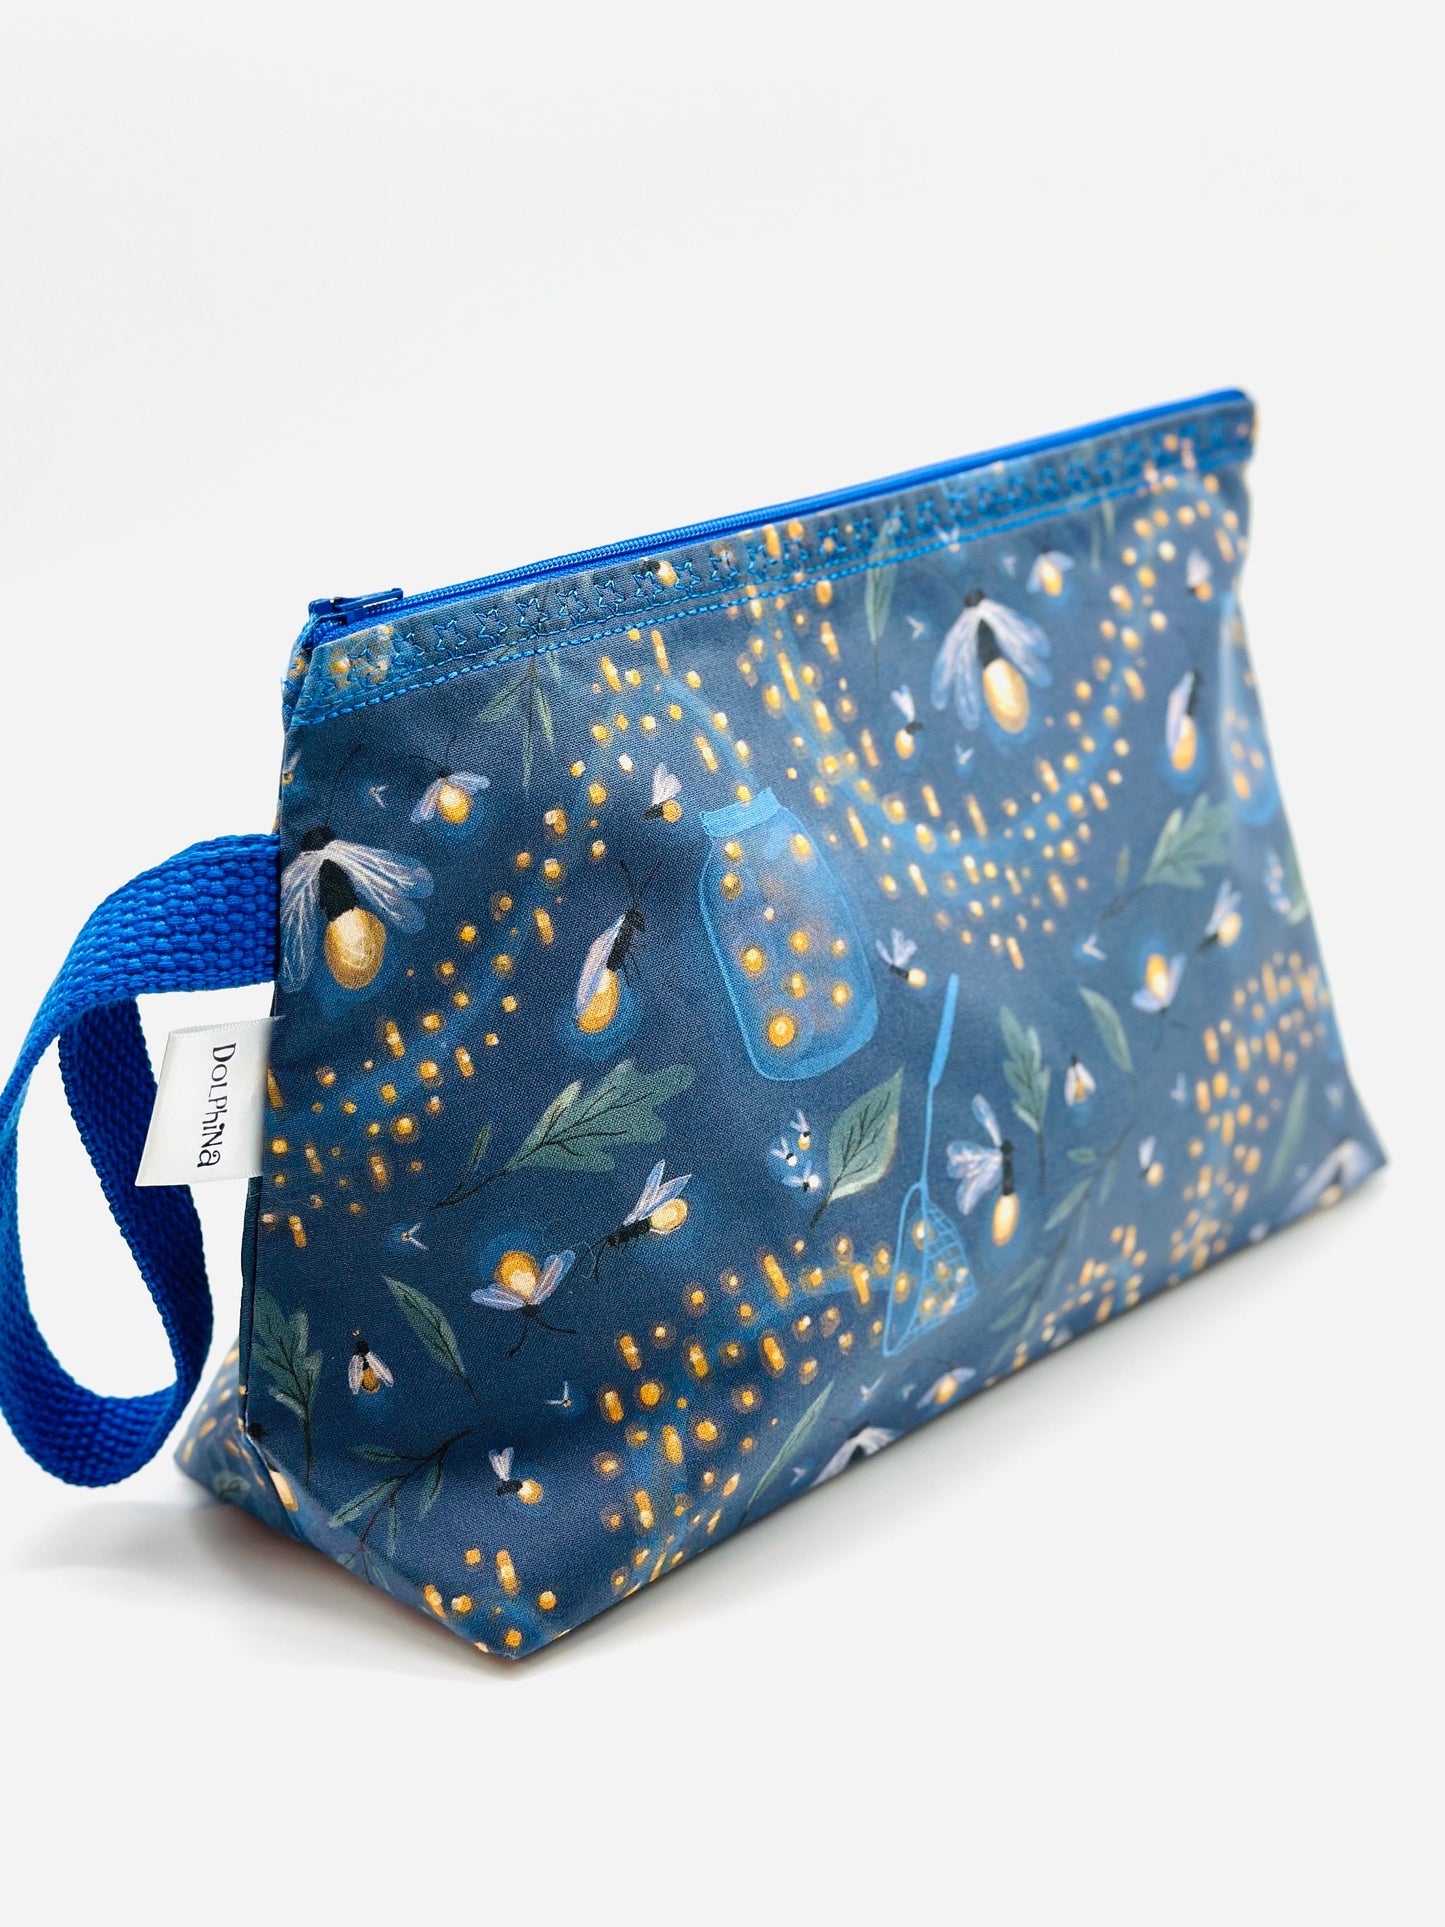 Large project bag - Catching Fireflies